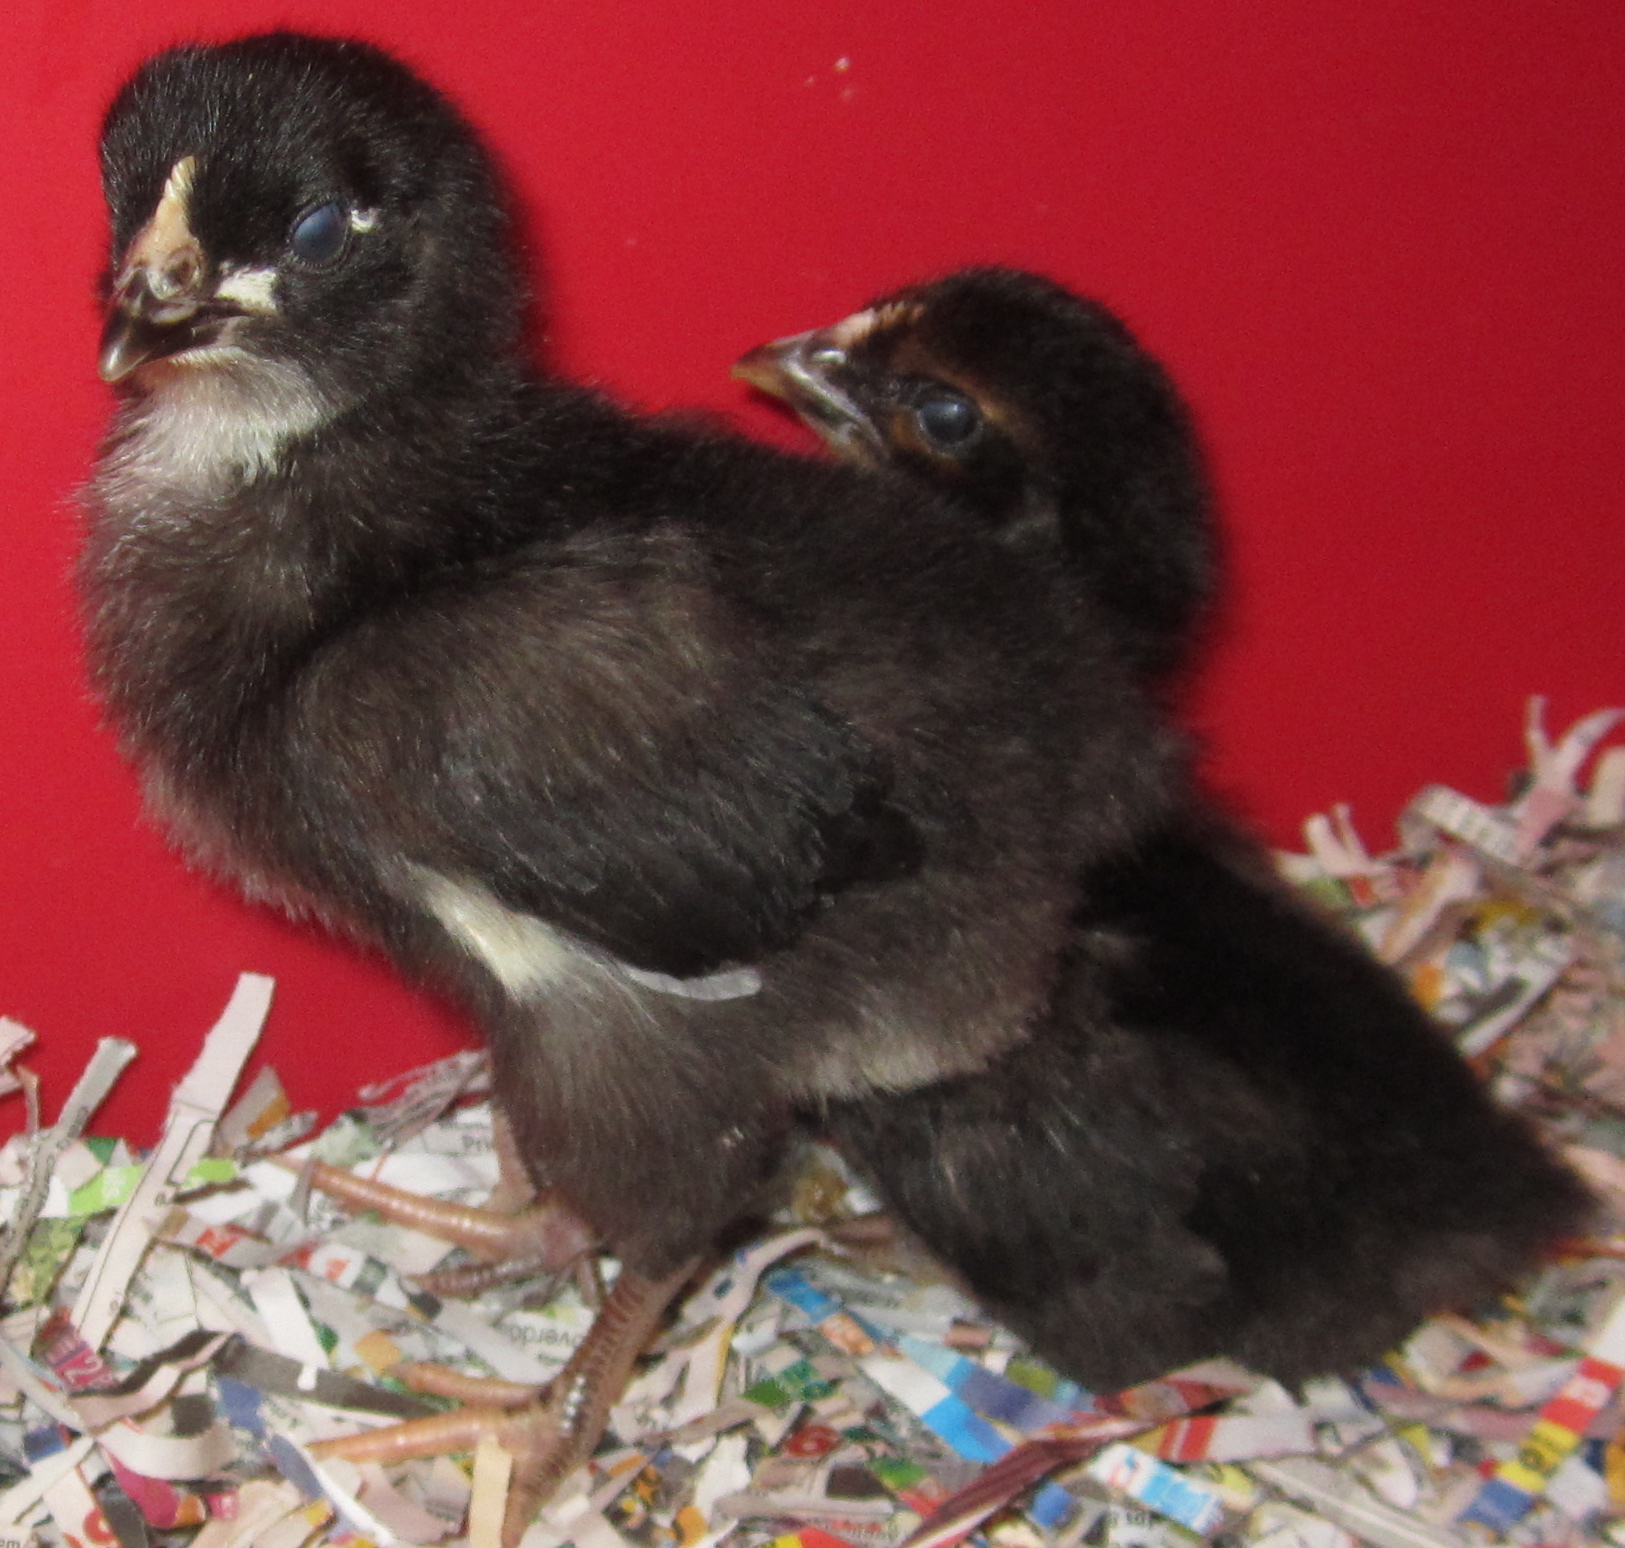 Our two baby black sex-linked chicks. I love to watch them scratch just like the big girls!